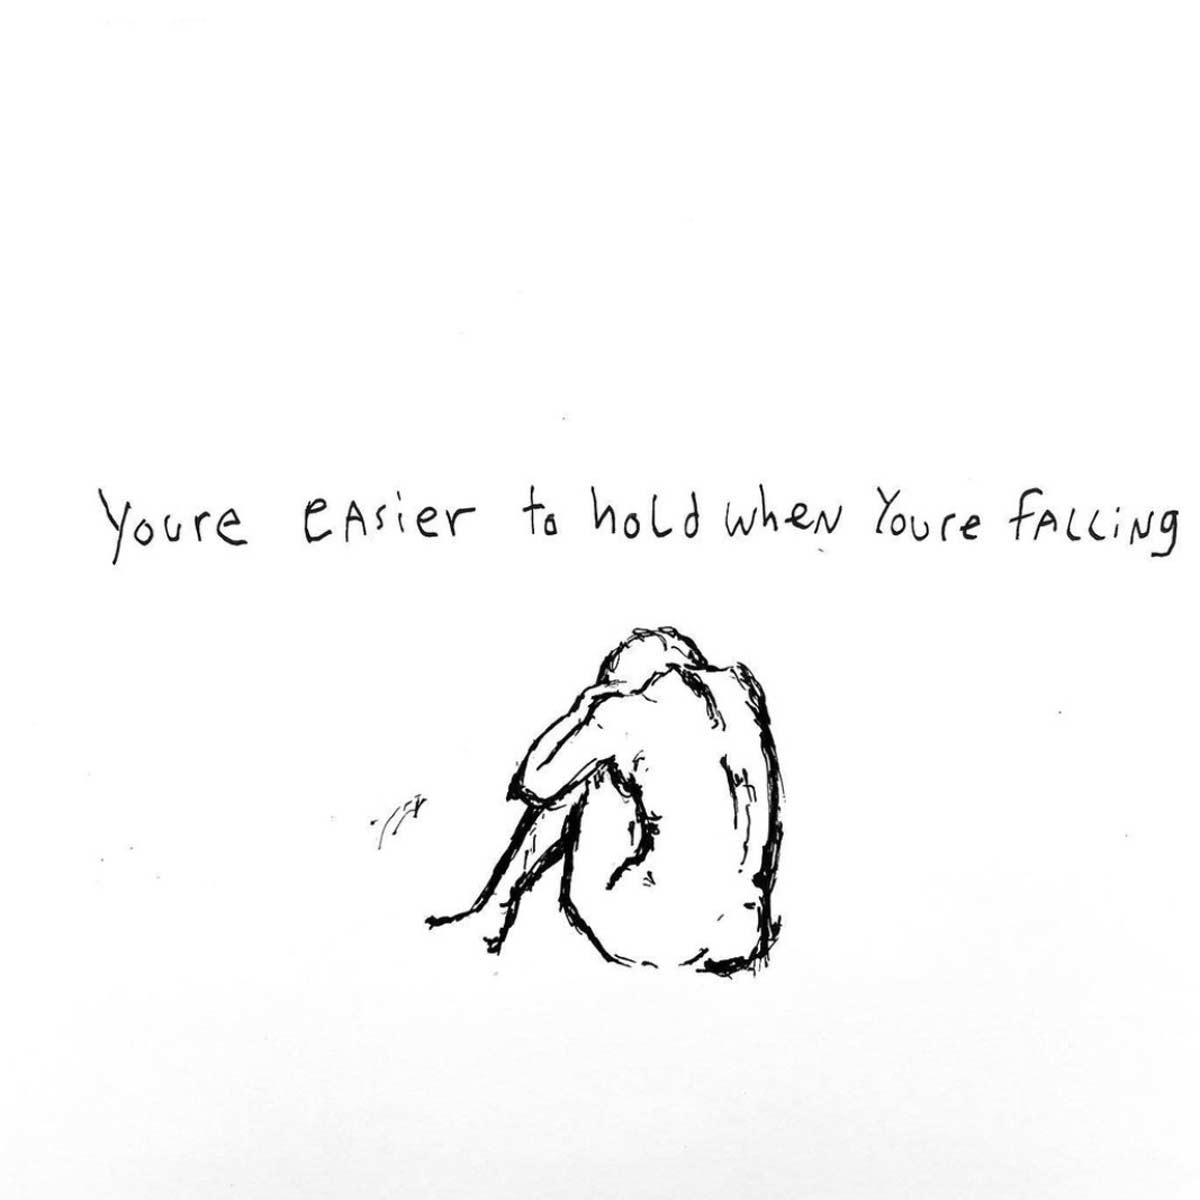 you're easier to hold when you're falling - original artwork